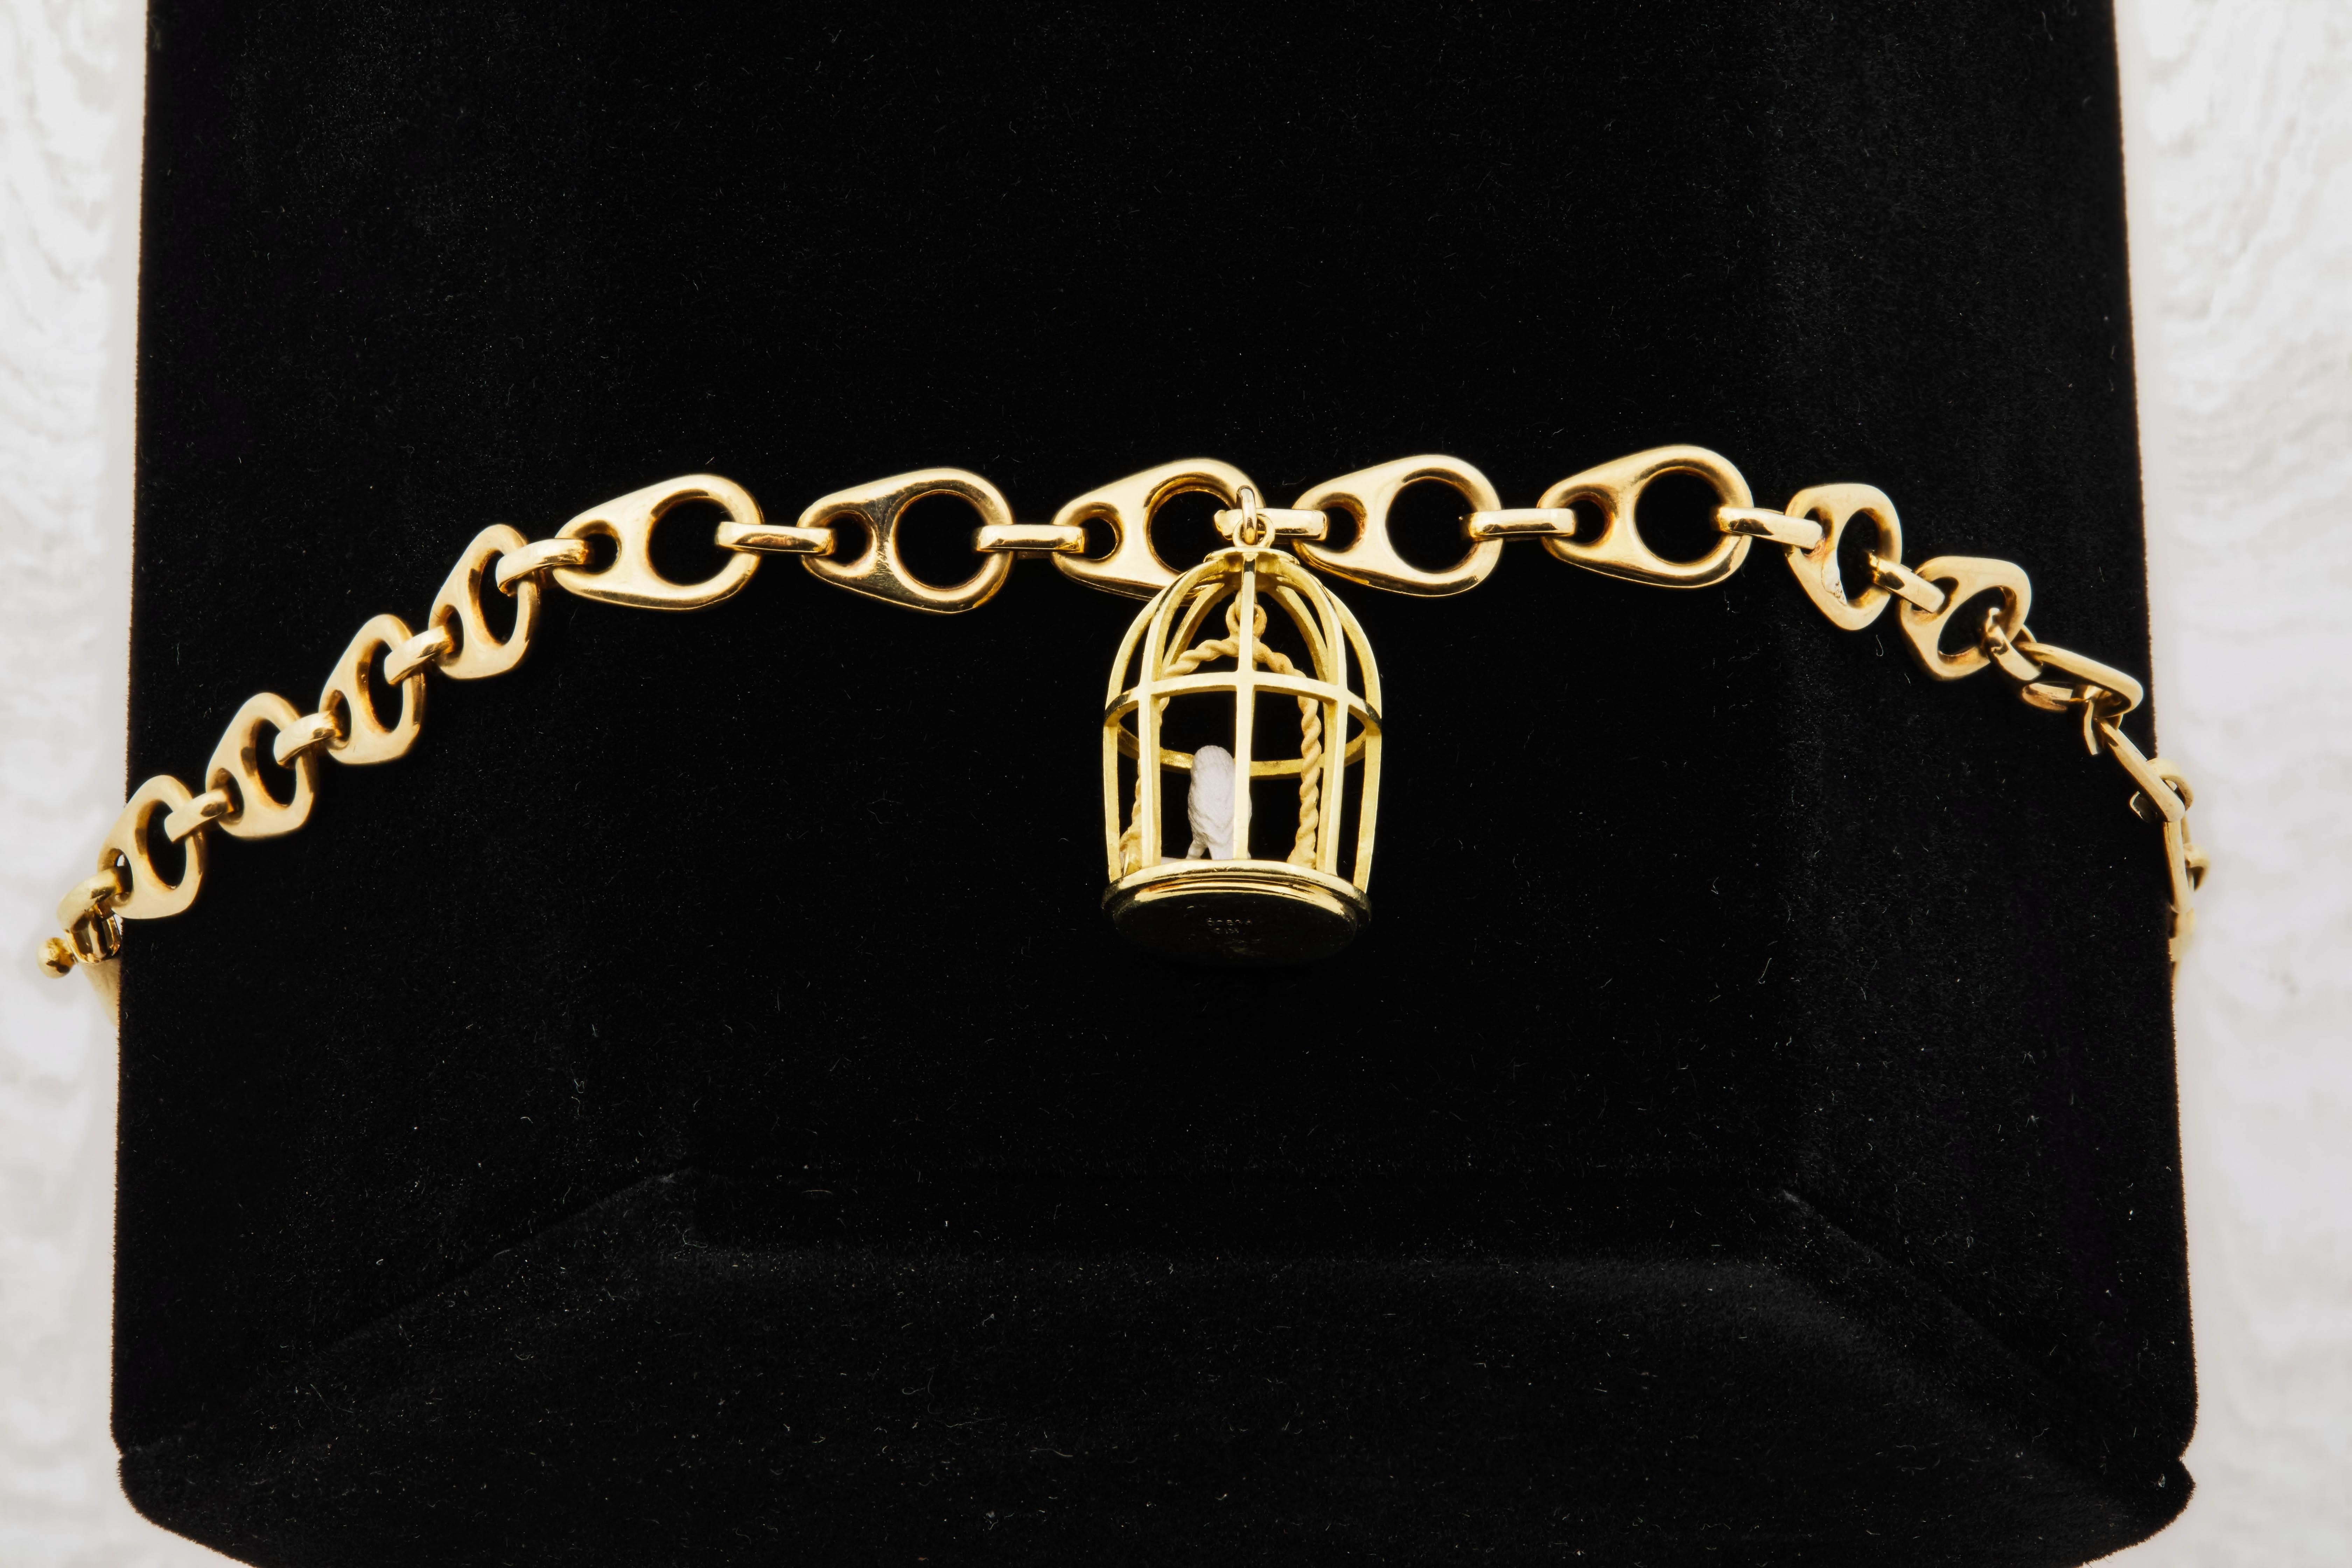 1960s French anchor link 18k gold bracelet, with 18k gold birdcage charm (with bird). Birdcage charm measures 17.5mm H x 11.6mm W.